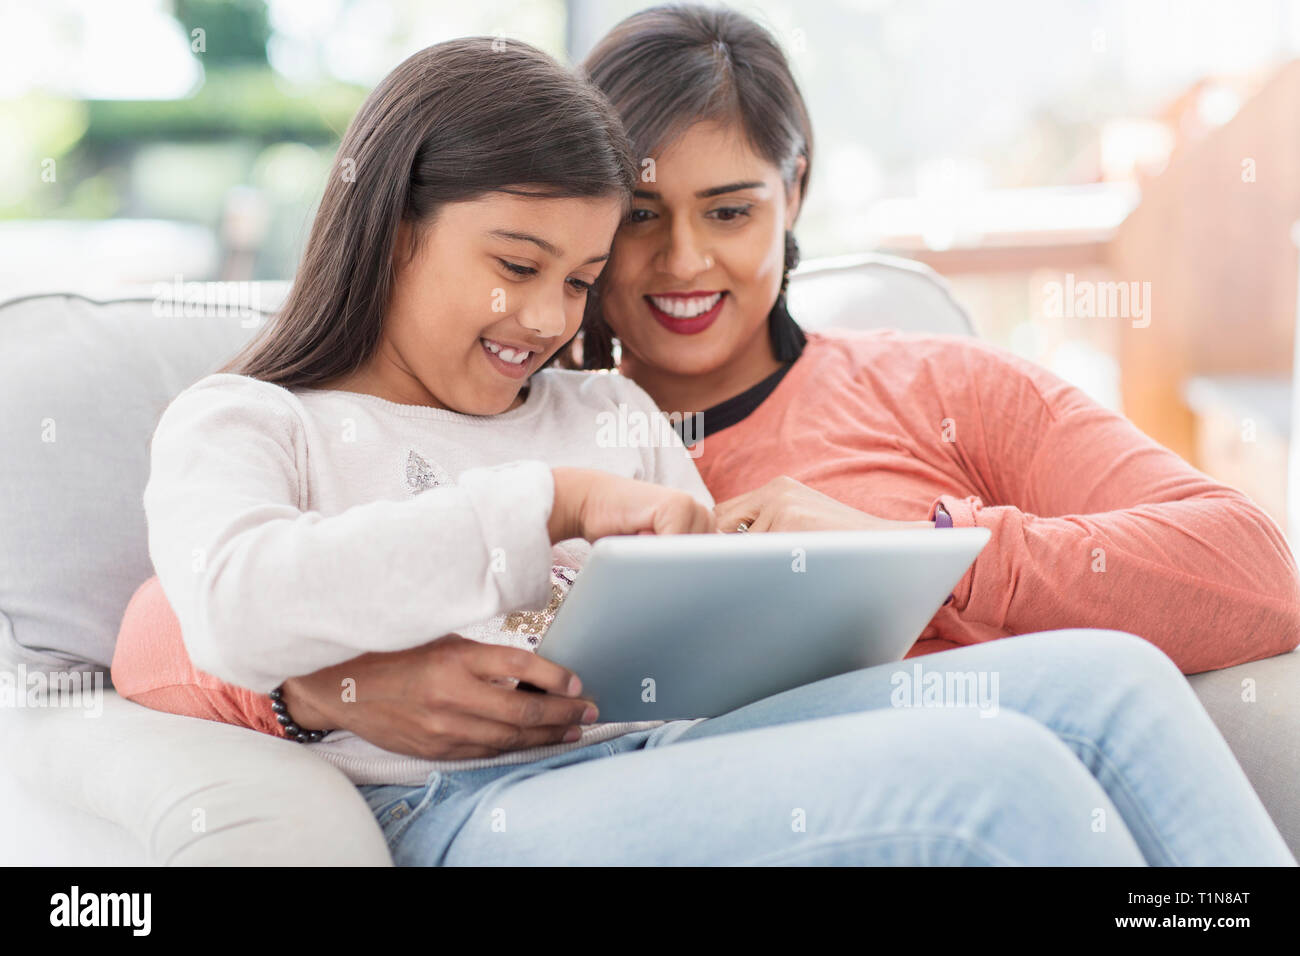 Happy mother and daughter using digital tablet Banque D'Images